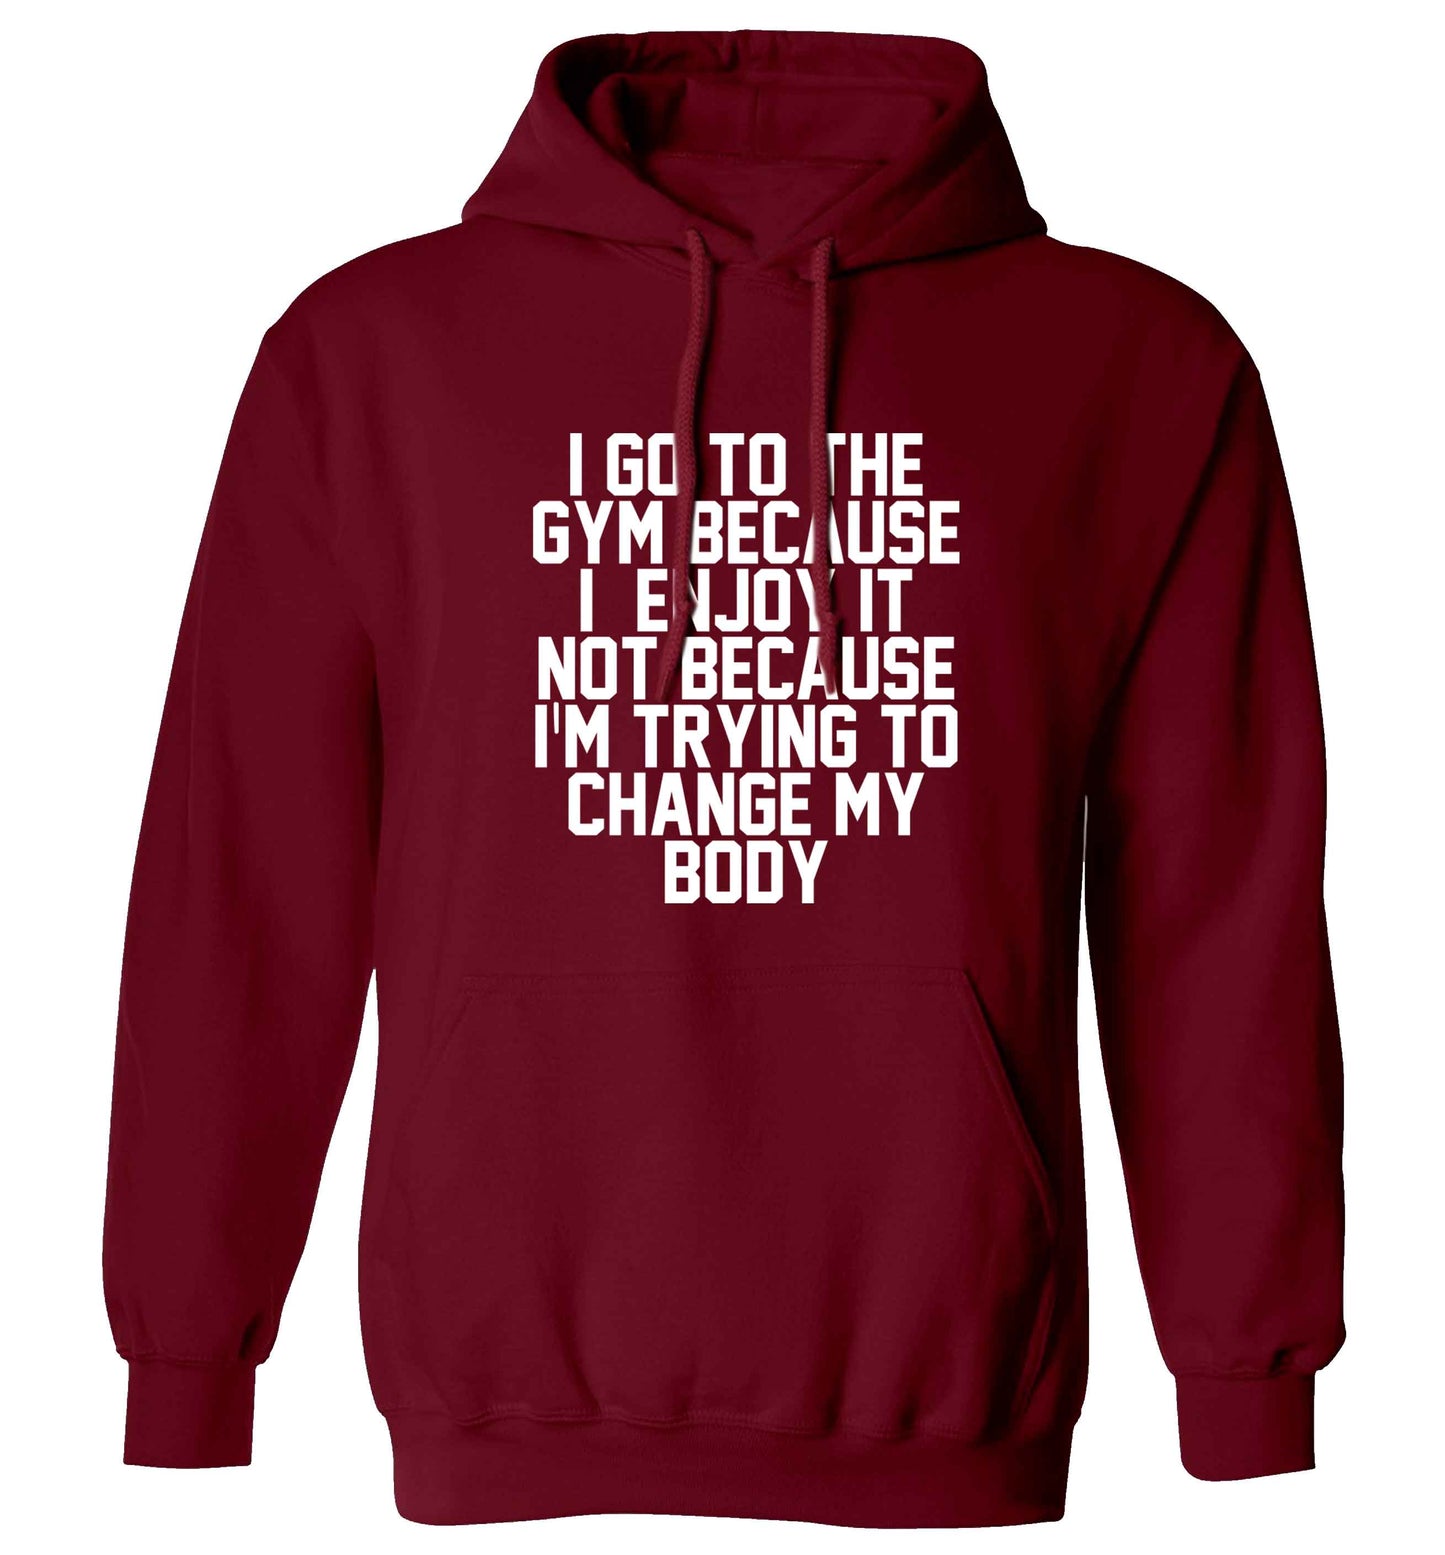 I go to the gym because I enjoy it not because I'm trying to change my body adults unisex maroon hoodie 2XL